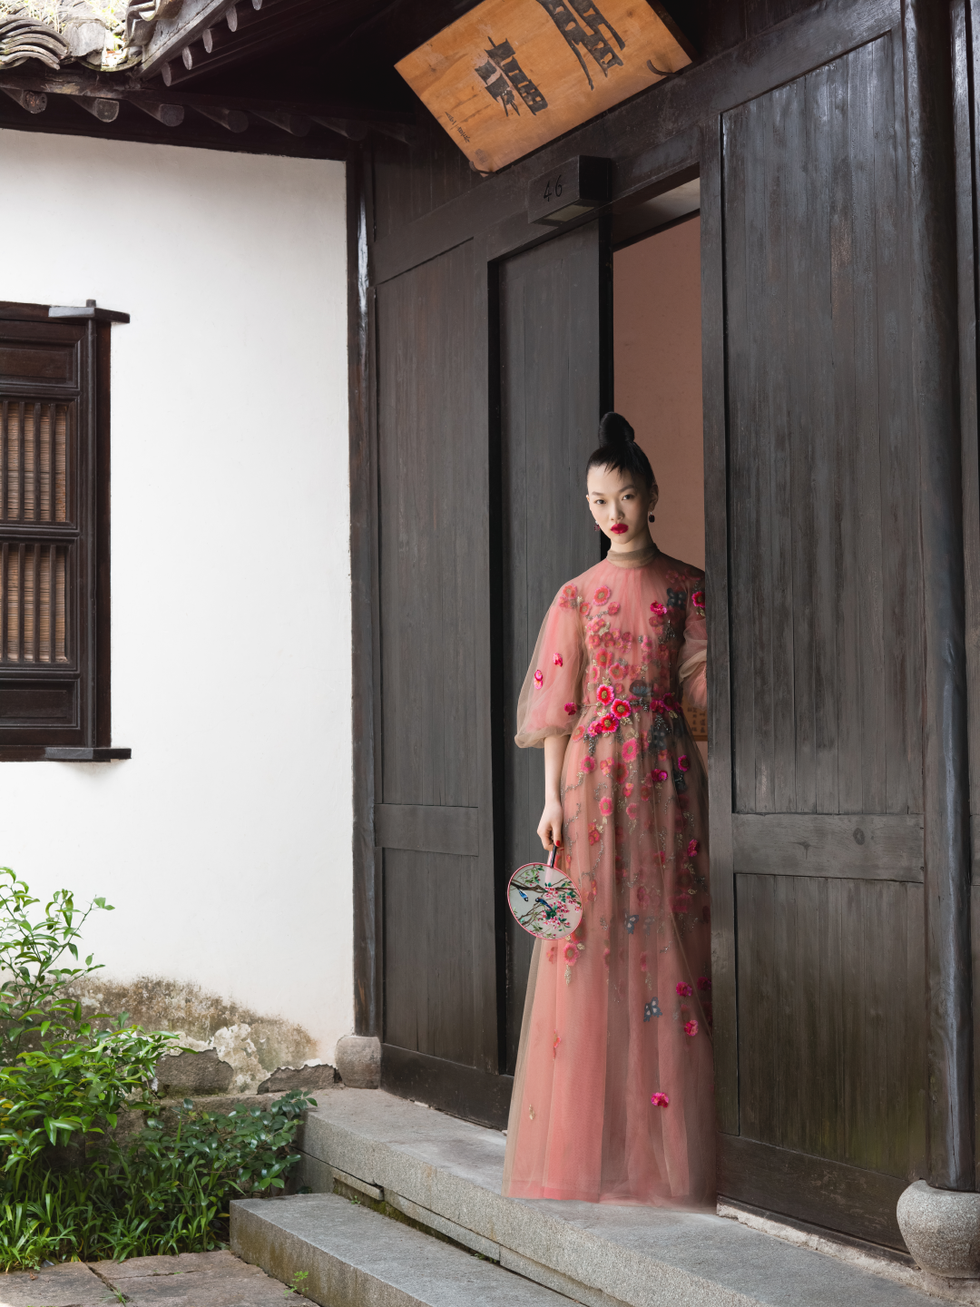 Clothing, Dress, Beauty, Fashion, Pink, Formal wear, Gown, Door, Photography, Temple, 